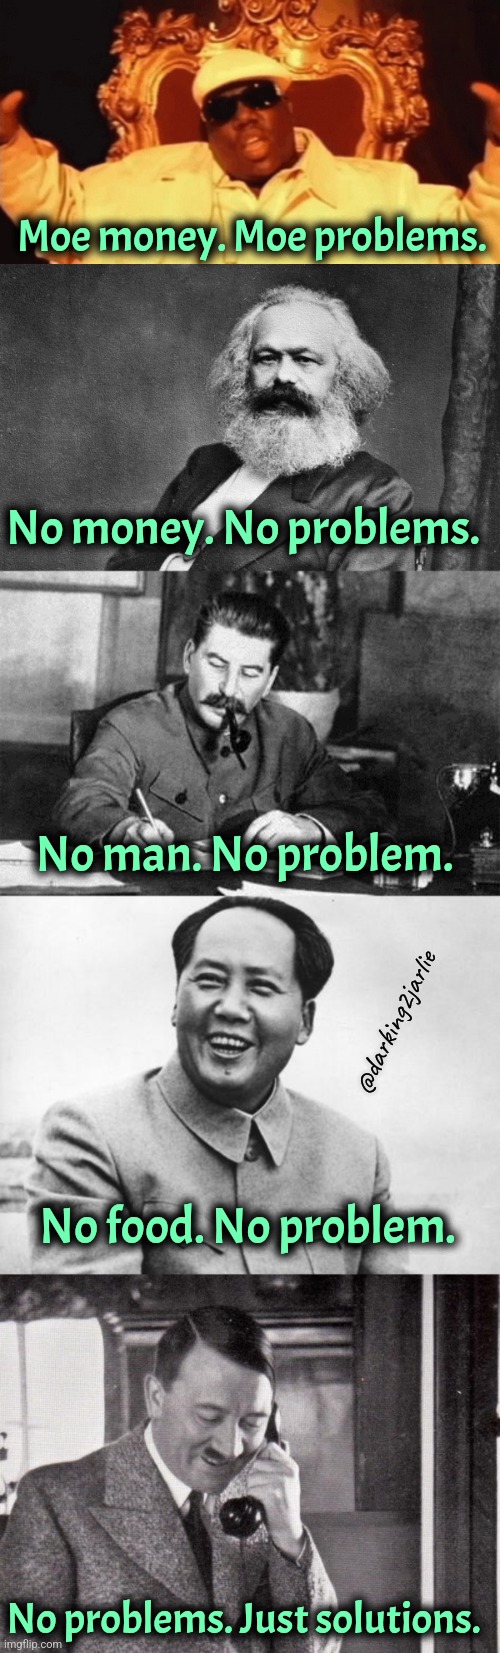 Problems not featuring Iggy | Moe money. Moe problems. No money. No problems. No man. No problem. @darking2jarlie; No food. No problem. No problems. Just solutions. | image tagged in biggie smalls,karl marx,stalin writing,the most interesting mao in the world,hitler | made w/ Imgflip meme maker